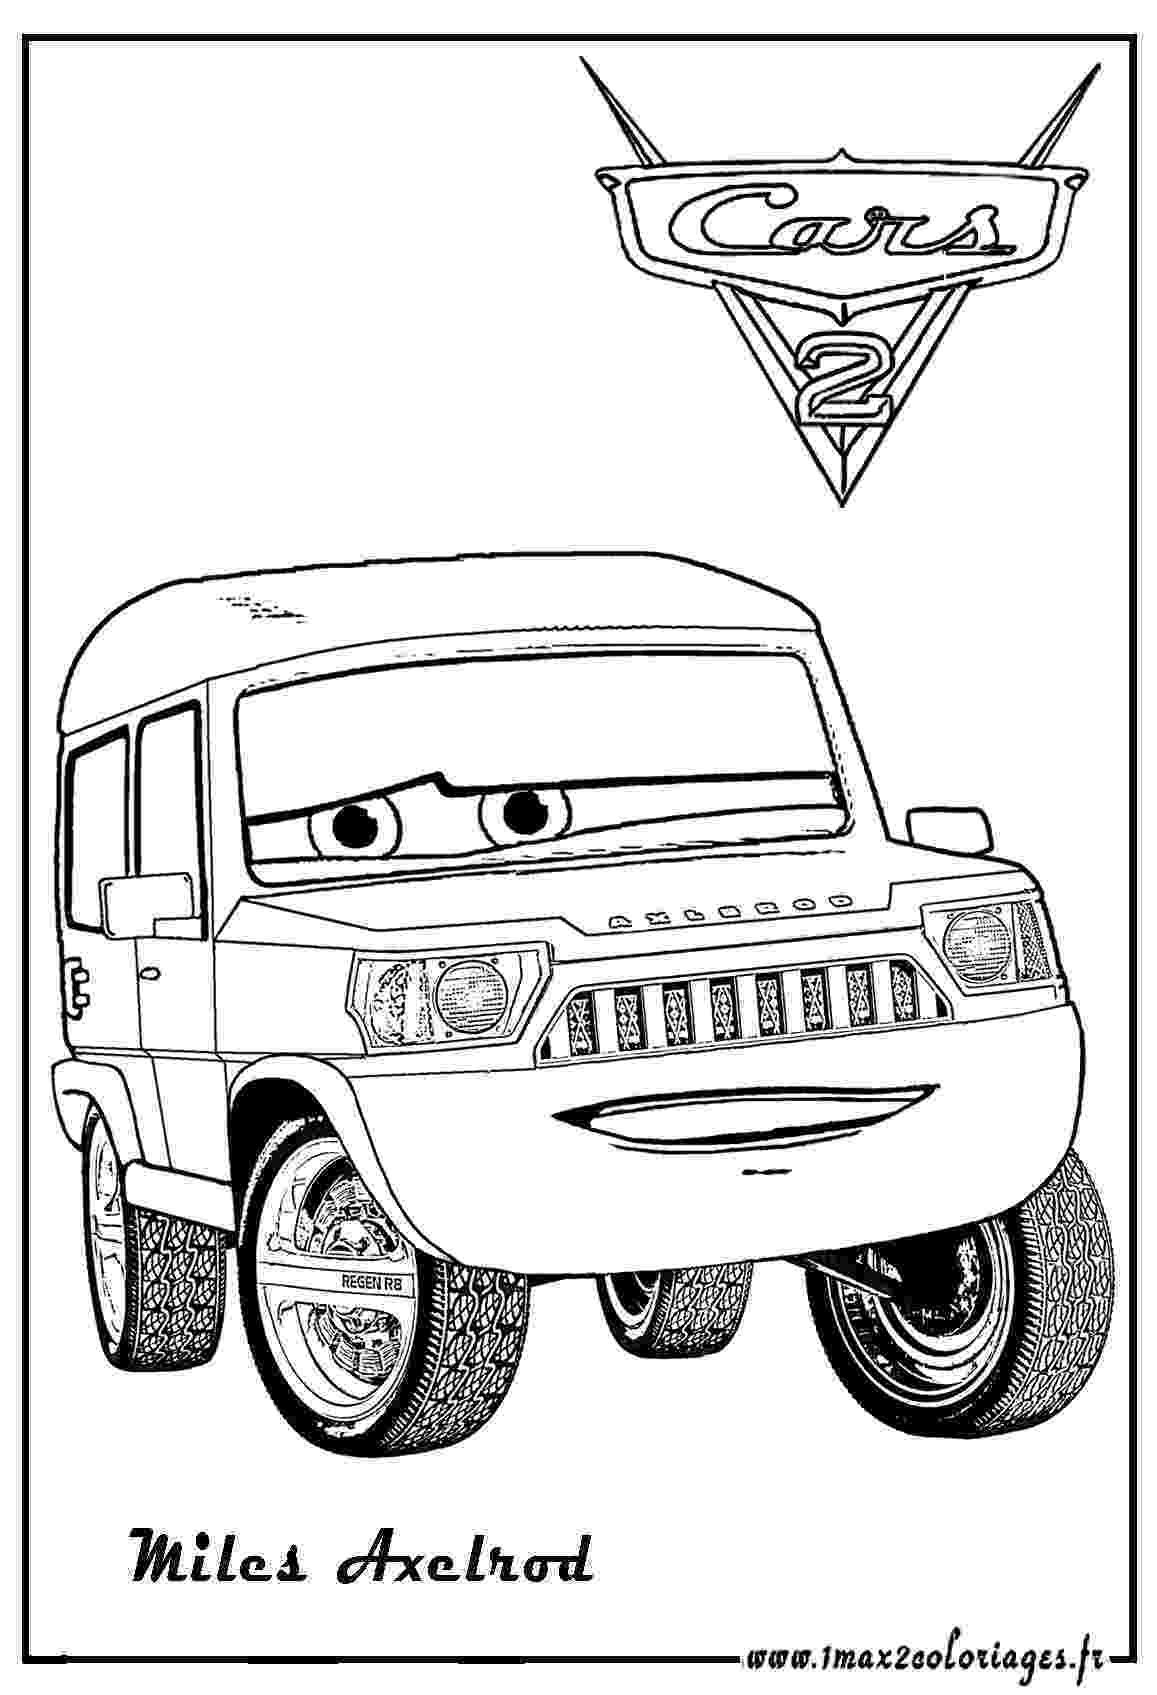 cars 2 colouring pages games cars 2 to download for free cars 2 kids coloring pages 2 cars pages colouring games 